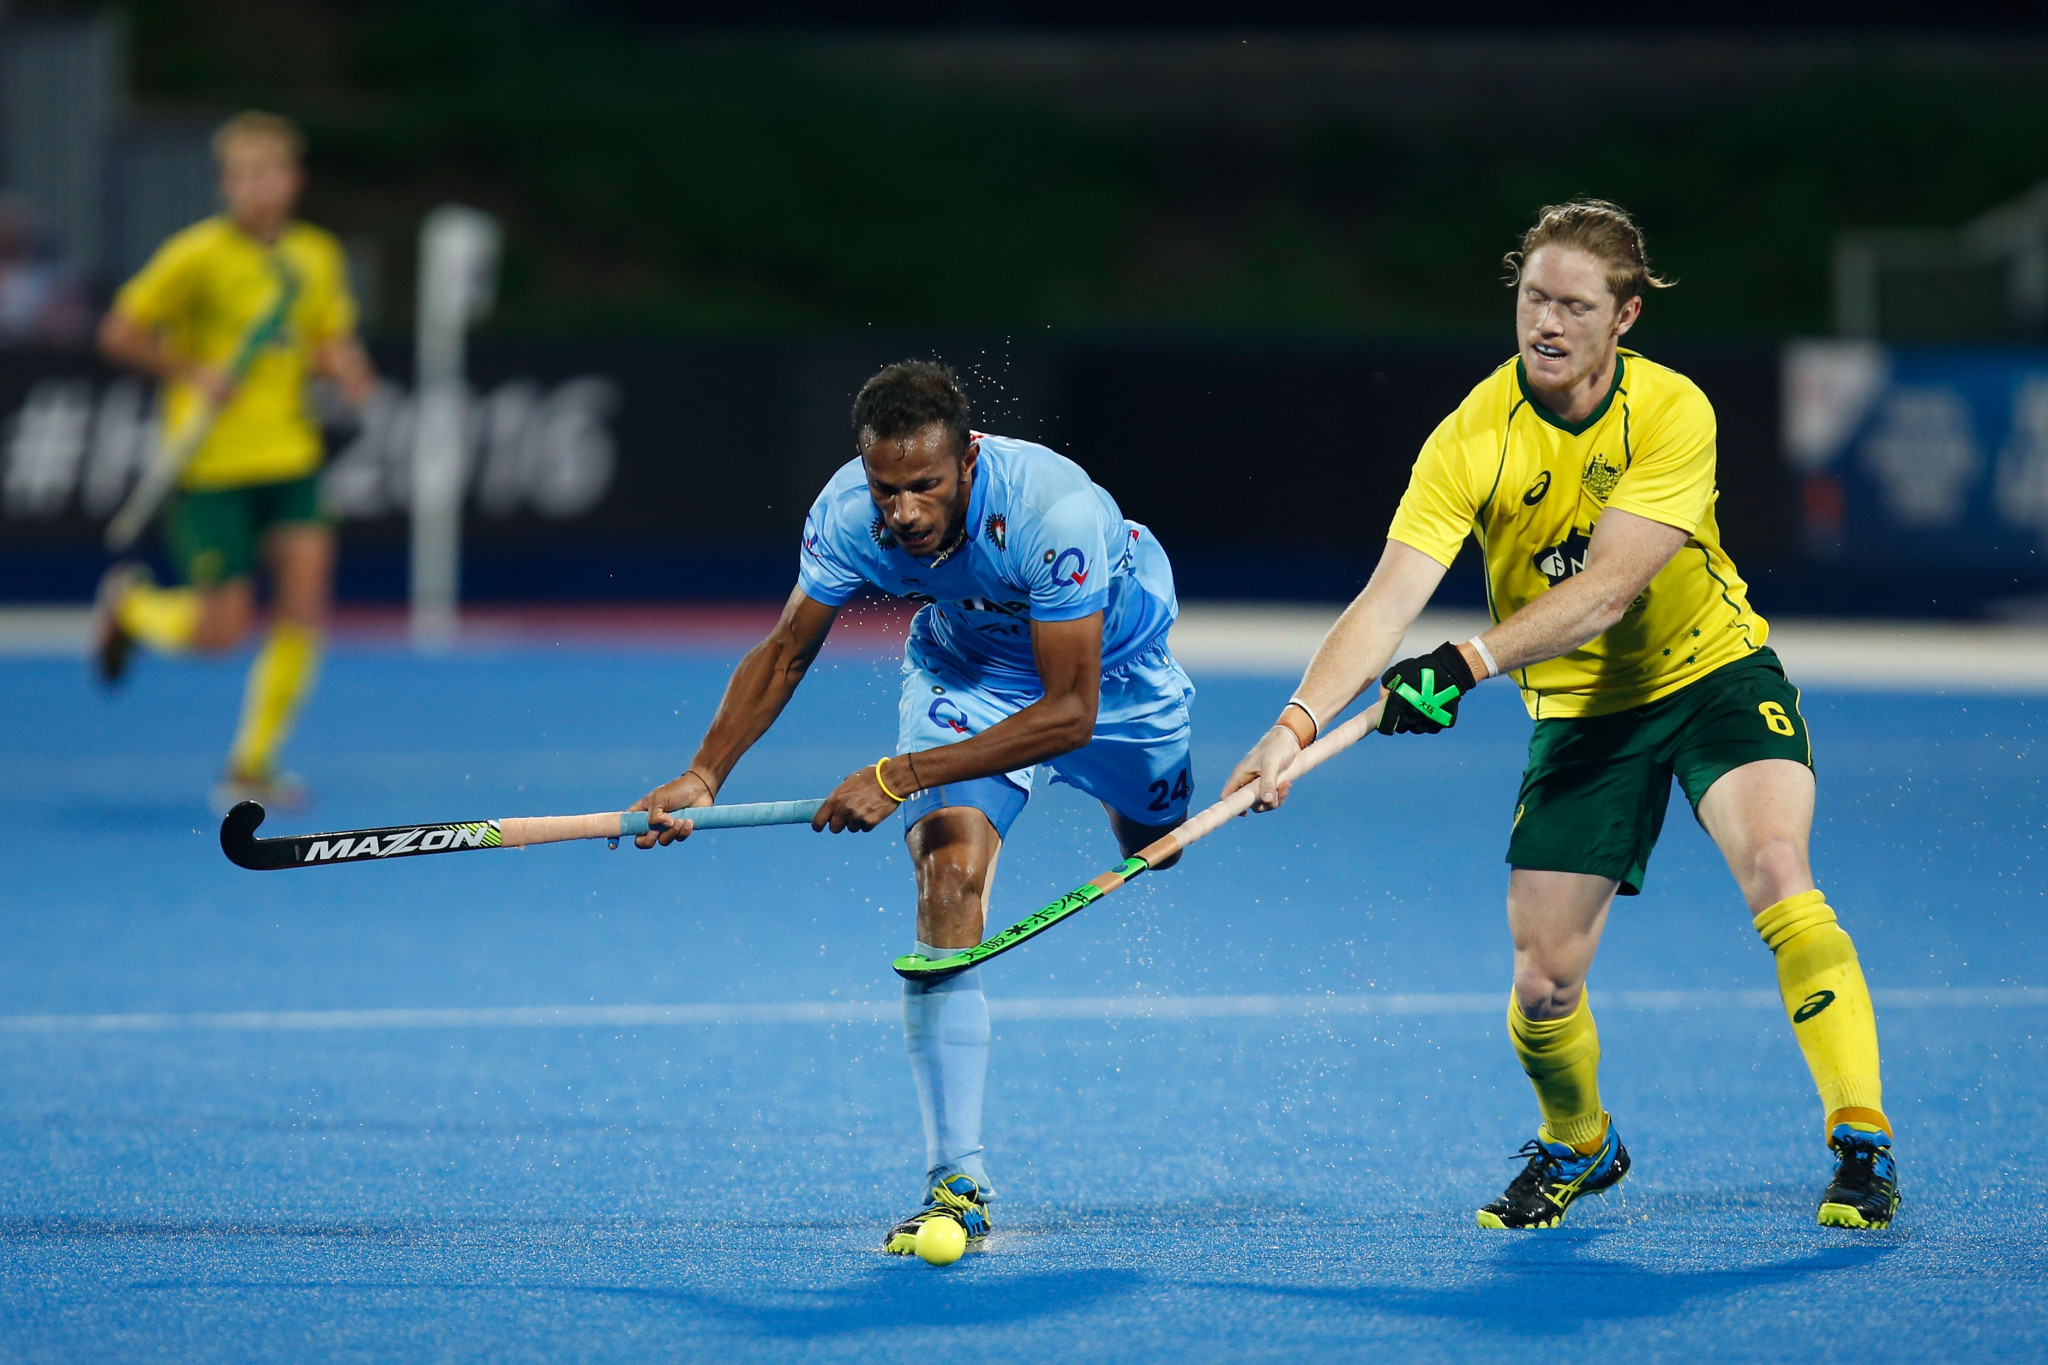 Defending champions Australia were held to a frustrating 1-1 draw by hosts India ©Getty Images